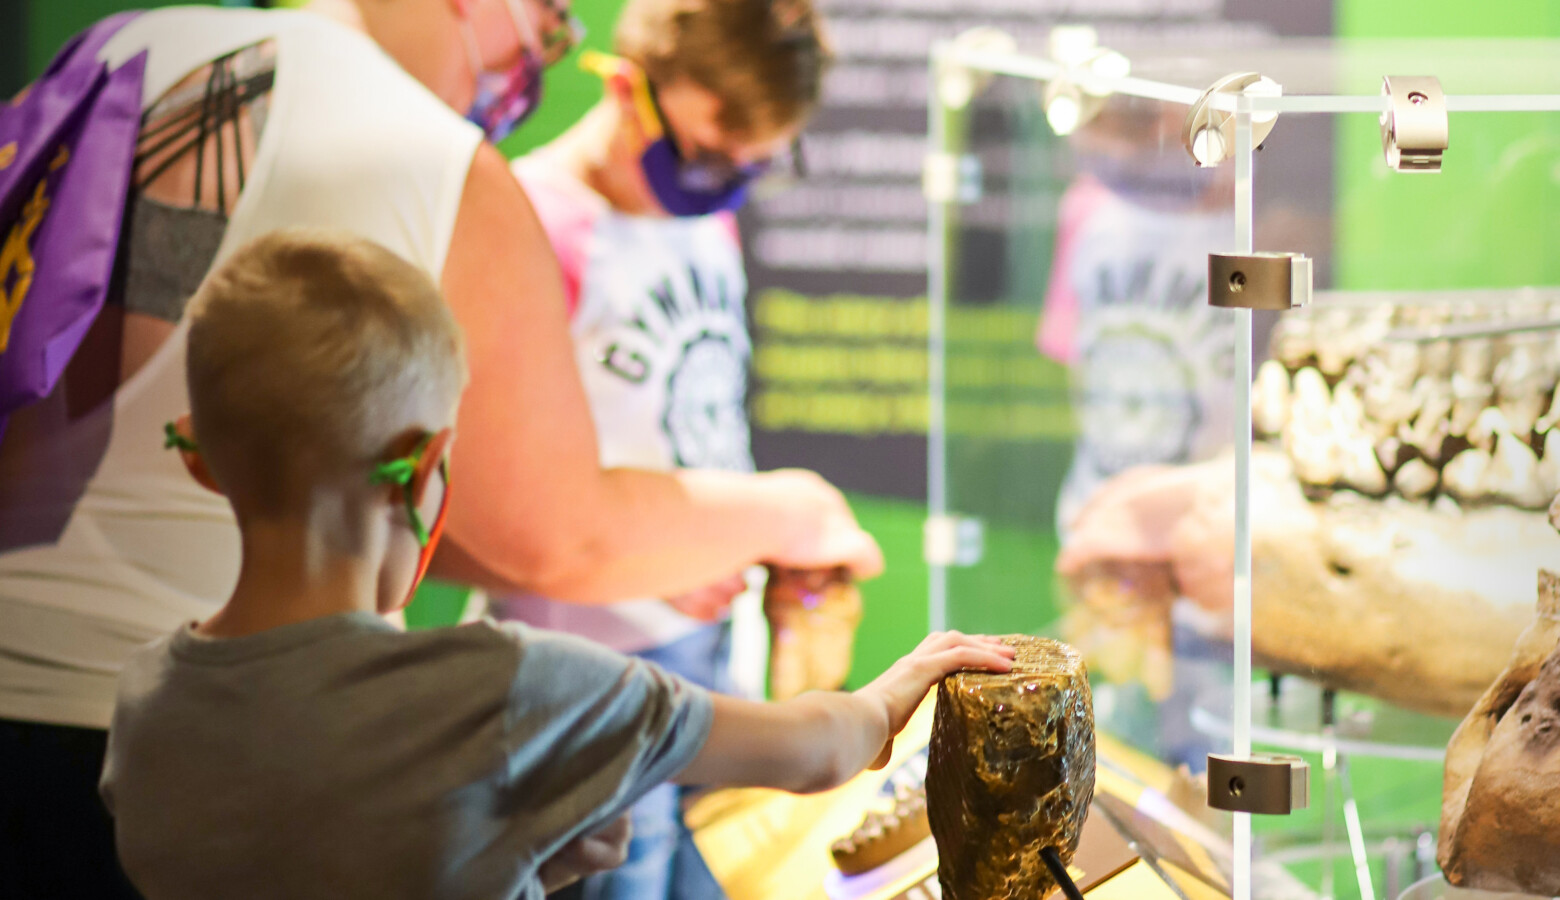 With in-person visits and field trips limited, places like the Indiana State Museum are developing more online and virtual resources for teachers to use in their classrooms. (Photo provided by Indiana State Museum)